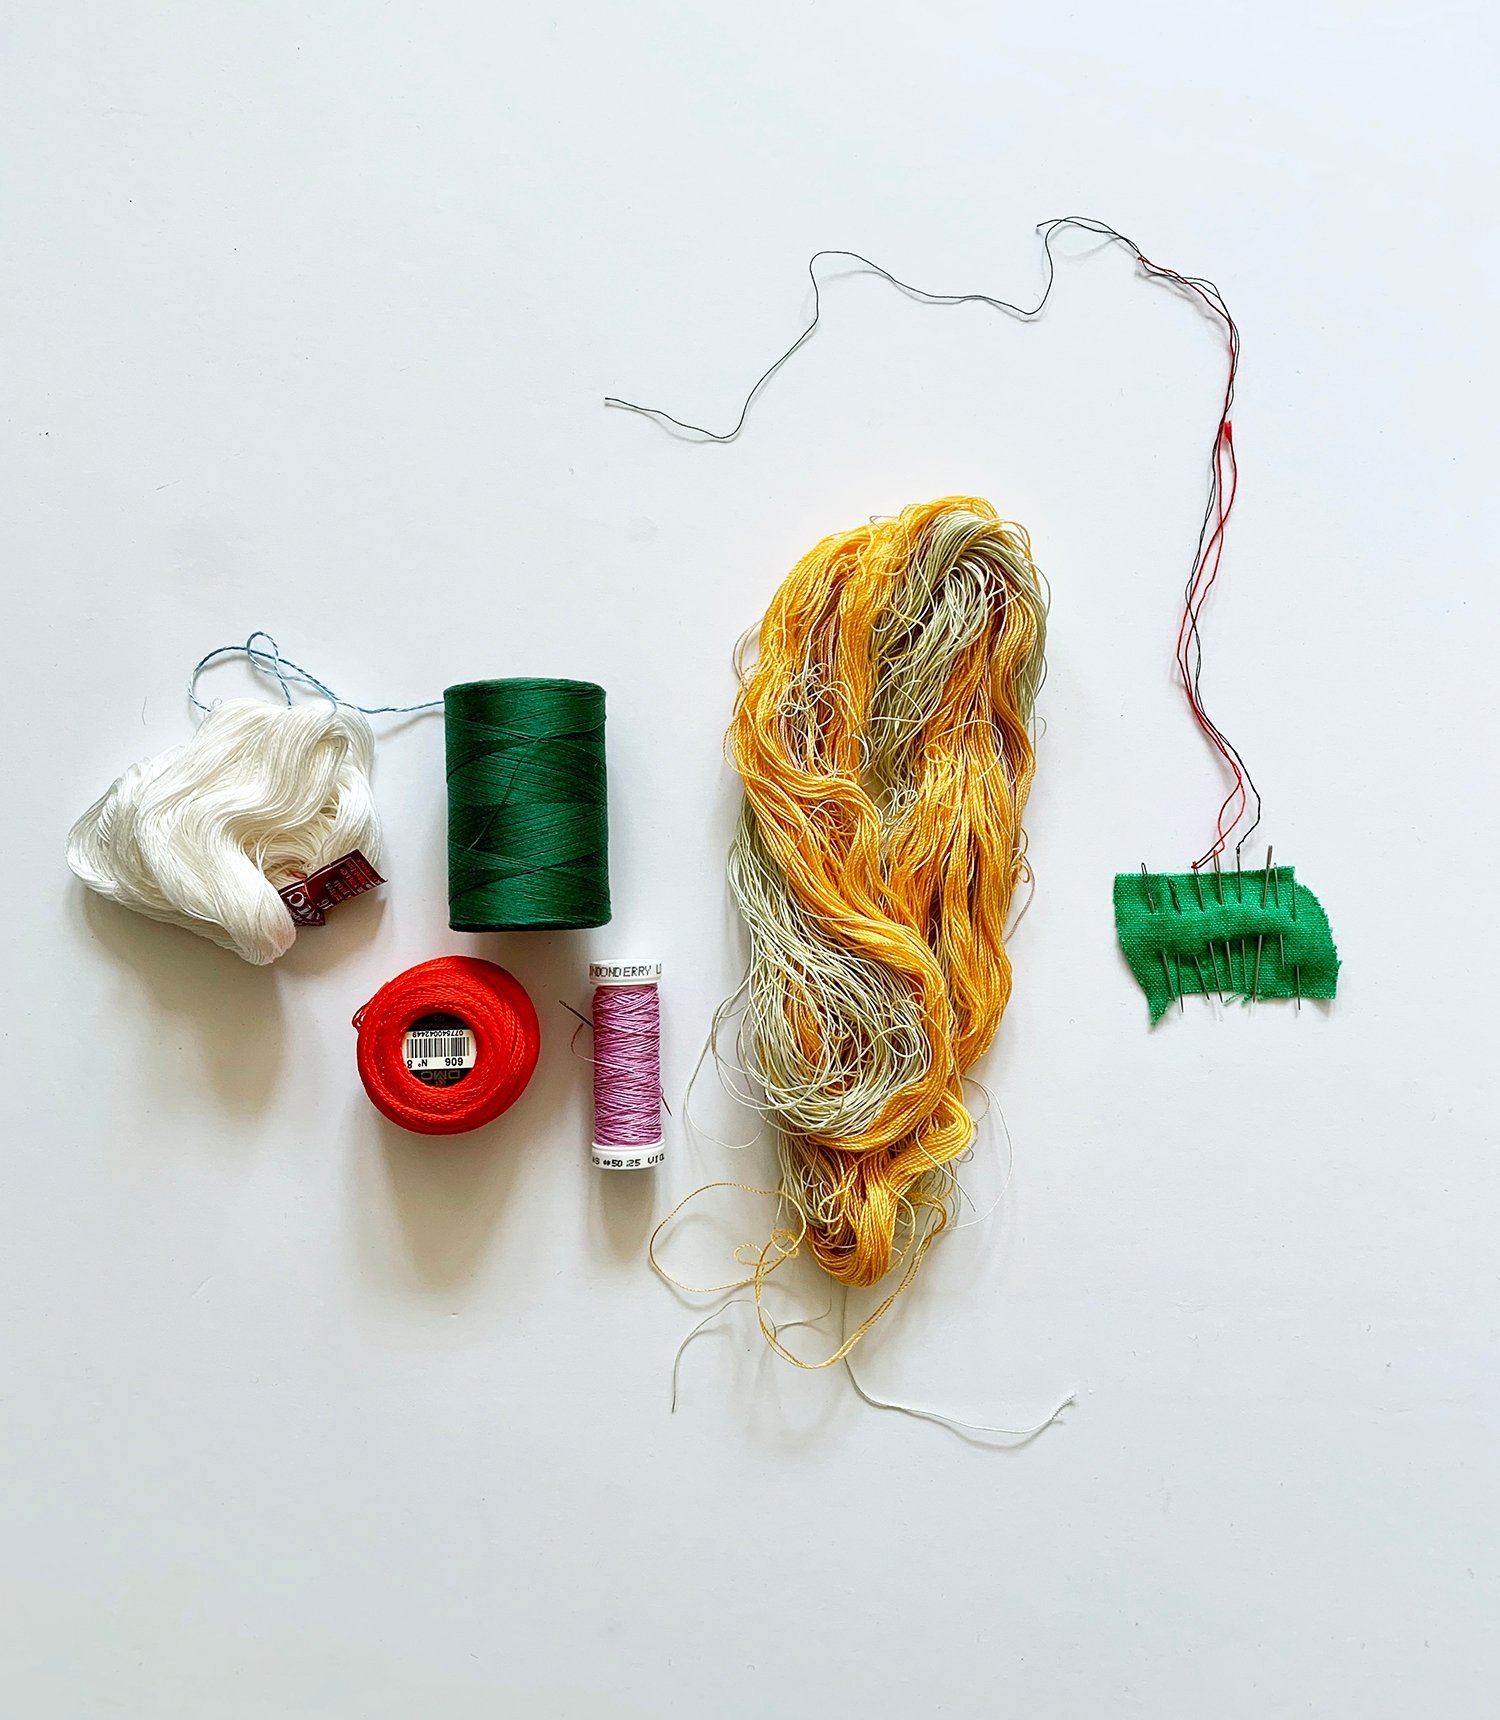 Thread and needles for hand quilting — Grace Rother